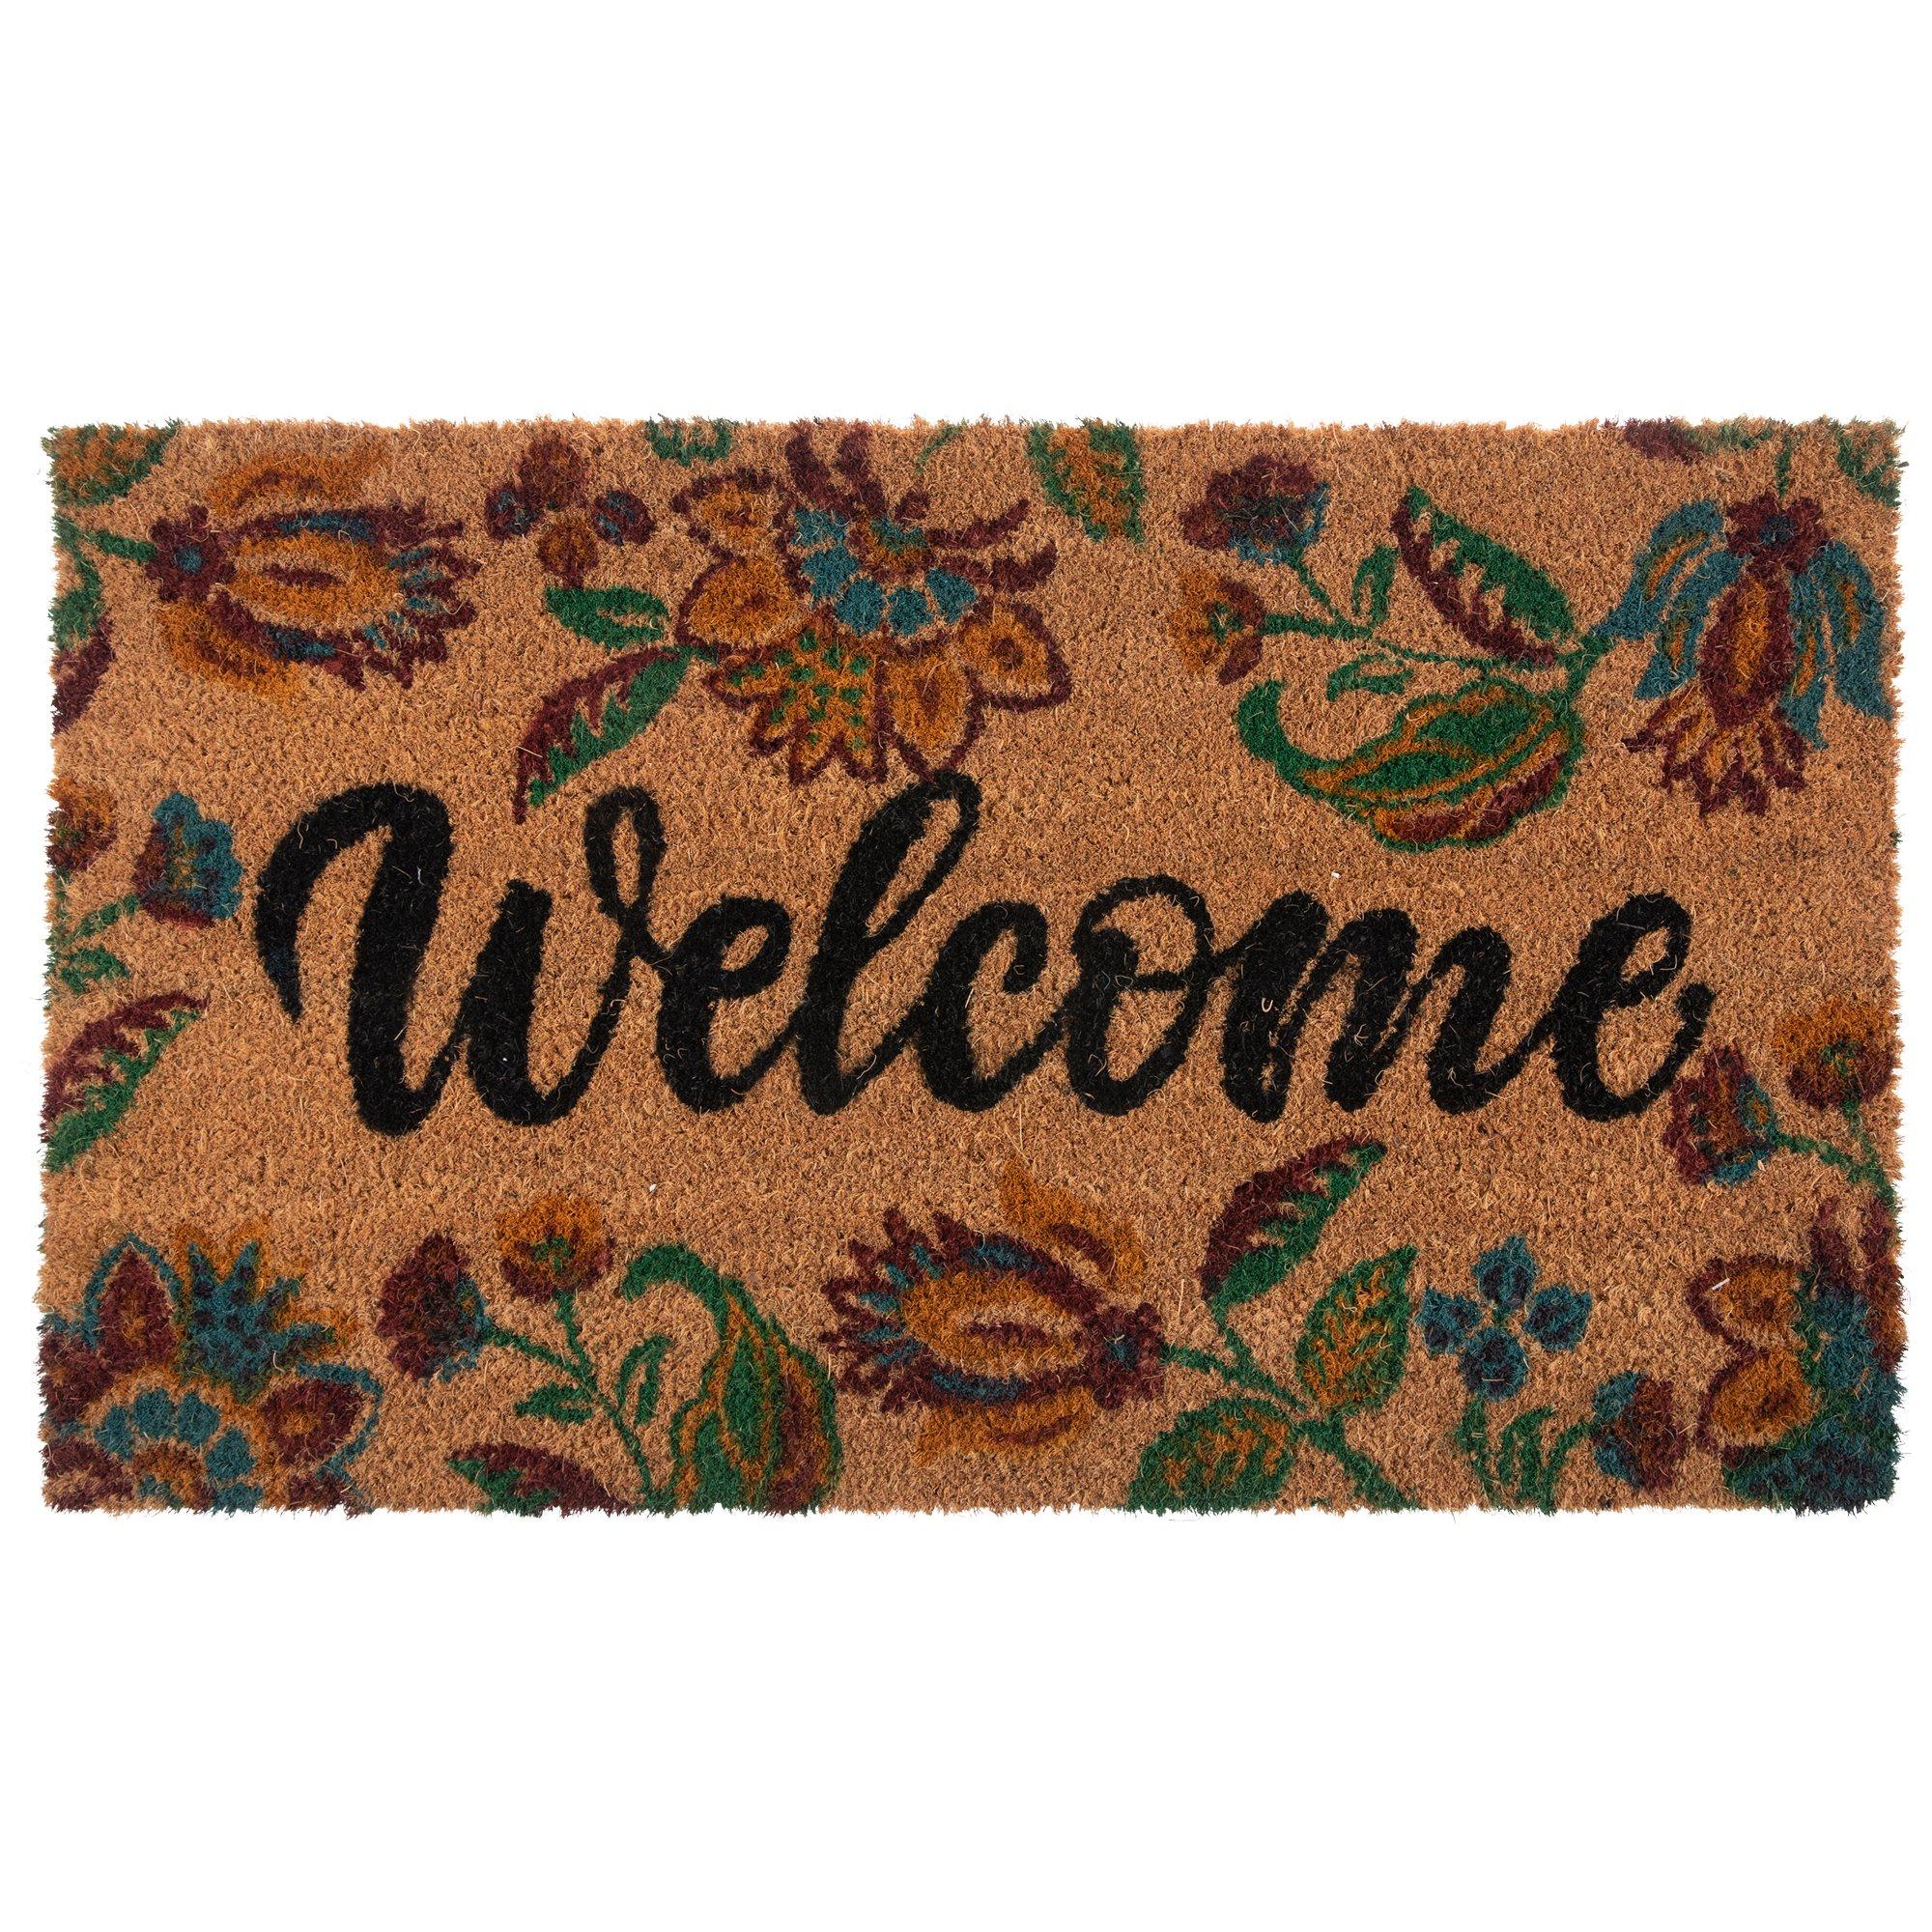 Fab Habitat Floral Doormat - Handwoven, Extra Thick, Durable - Natural Coir - Entryway Front Door Porch Patio - Wild Flowers Blue - 18x30Thick ft